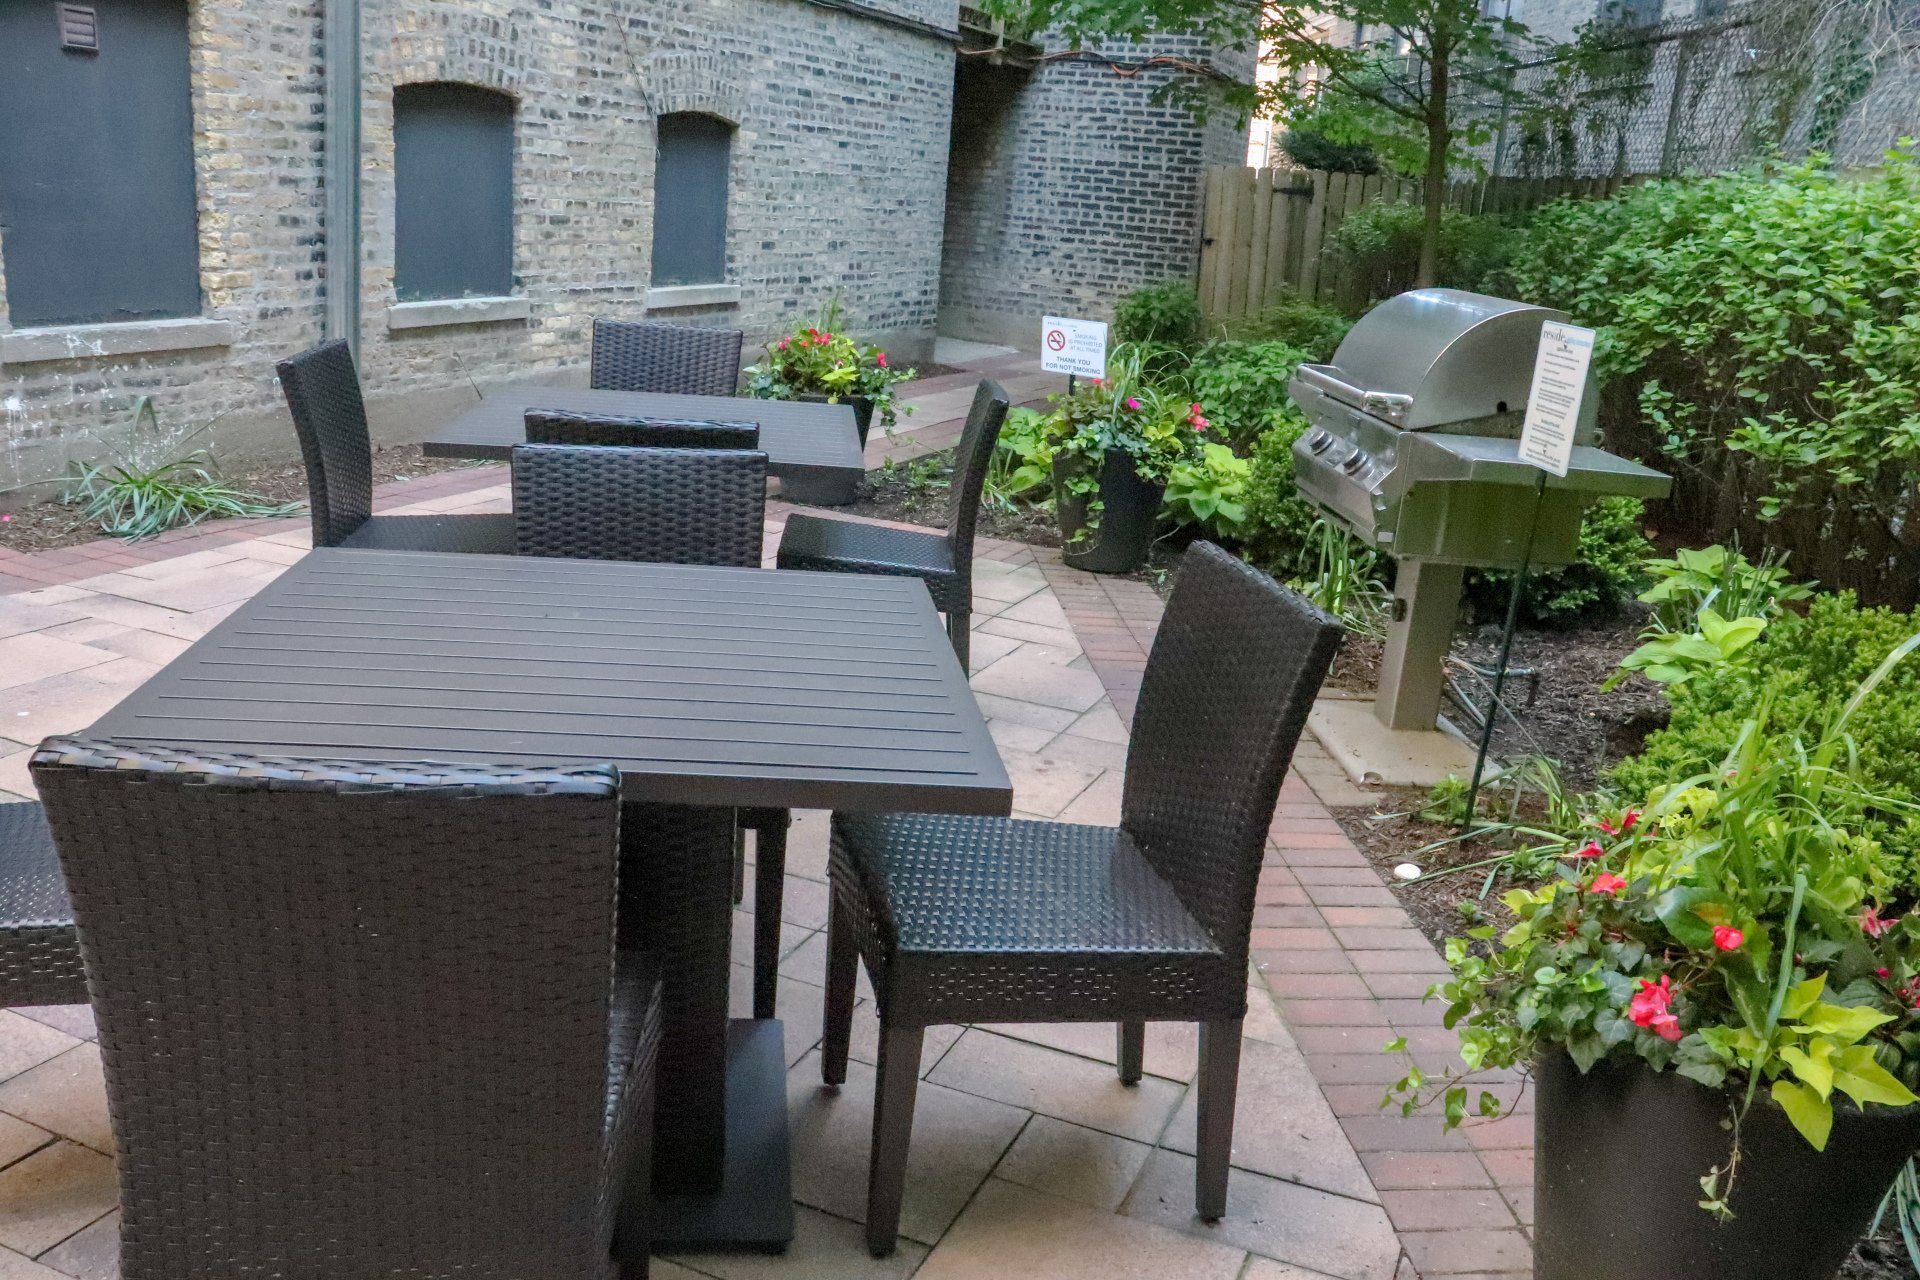 Apartment patio with tables and chairs and a grill at Reside at 849.